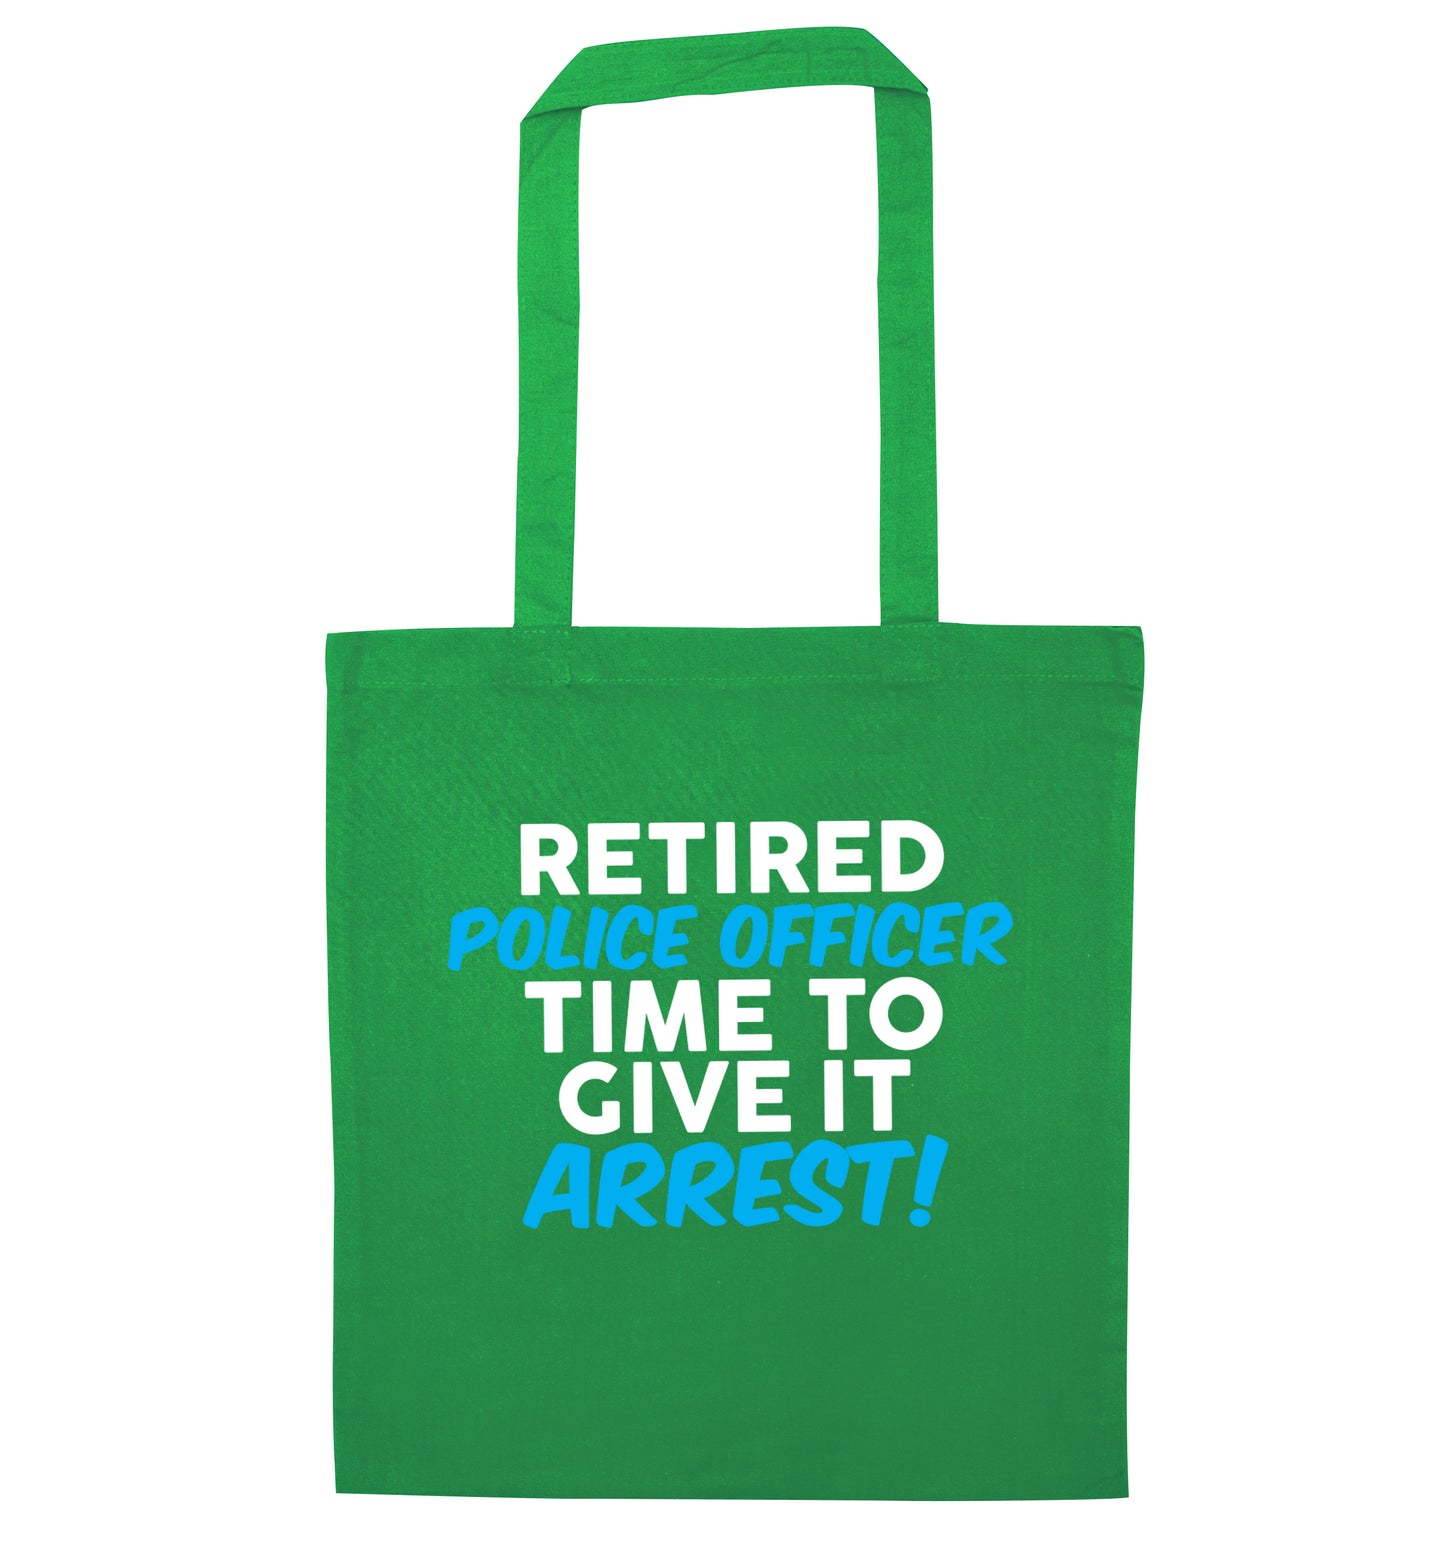 Retired police officer time to give it arrest green tote bag